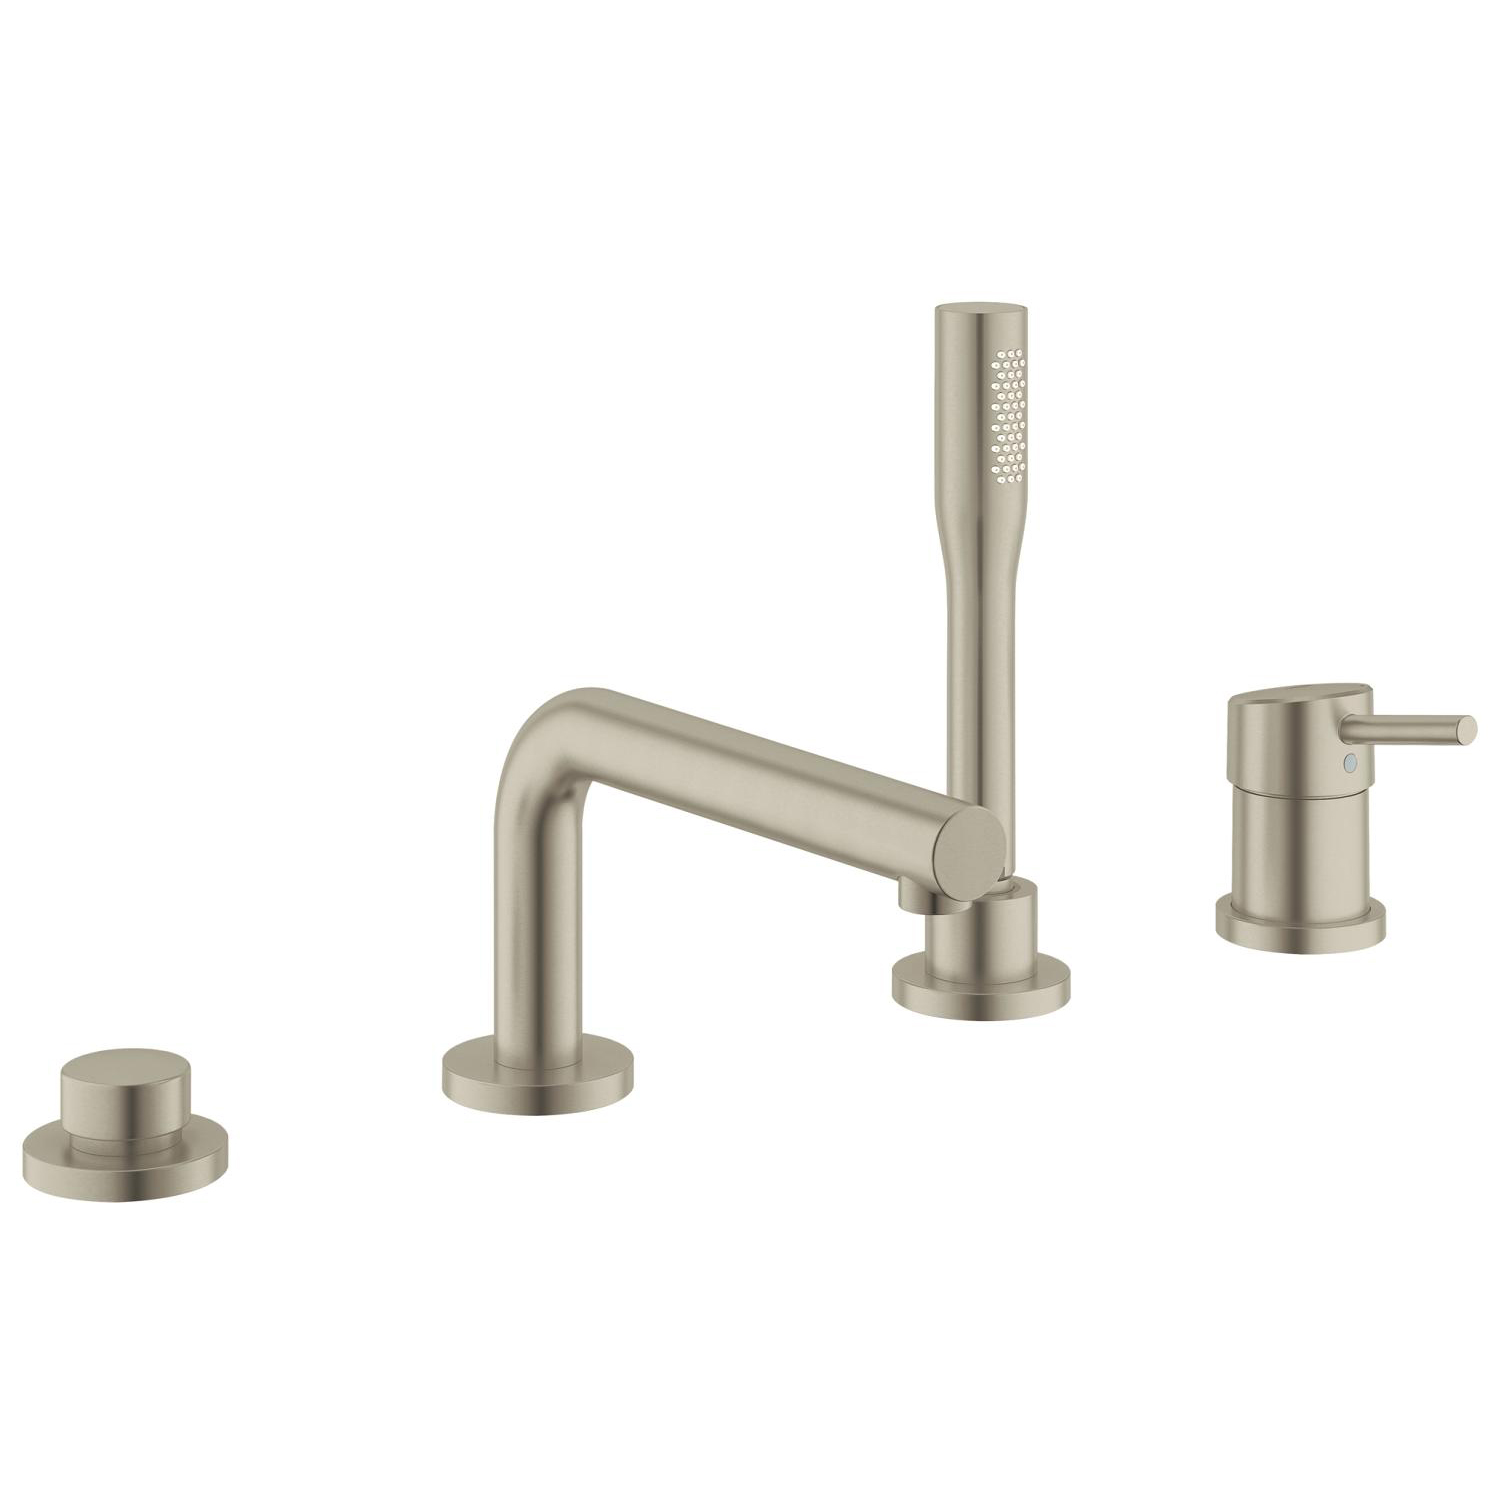 Concetto Deck Mounted Tub Faucet Plus Hand Shower In Brushed Nickel